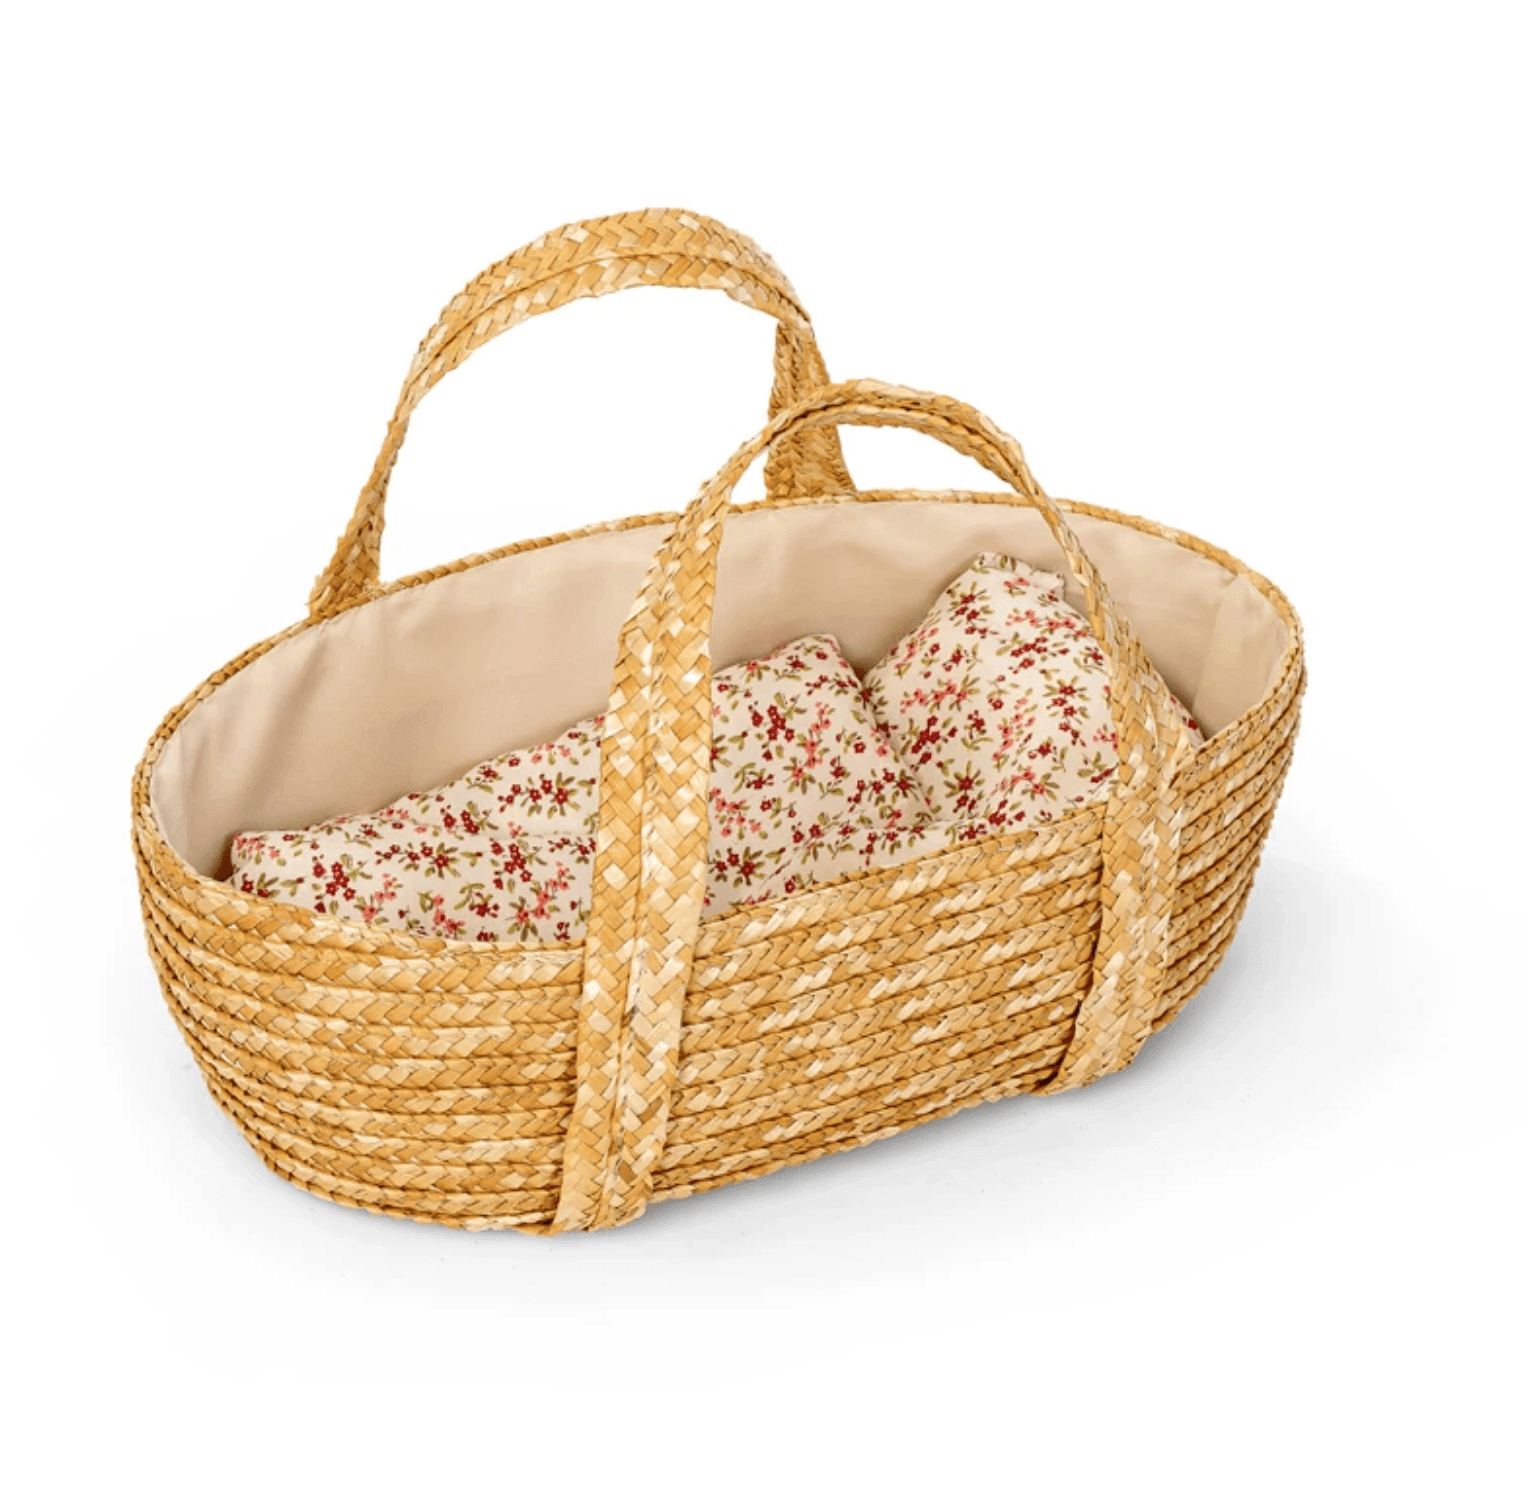 Moses Doll Basket for up to 14in dolls - Why and Whale